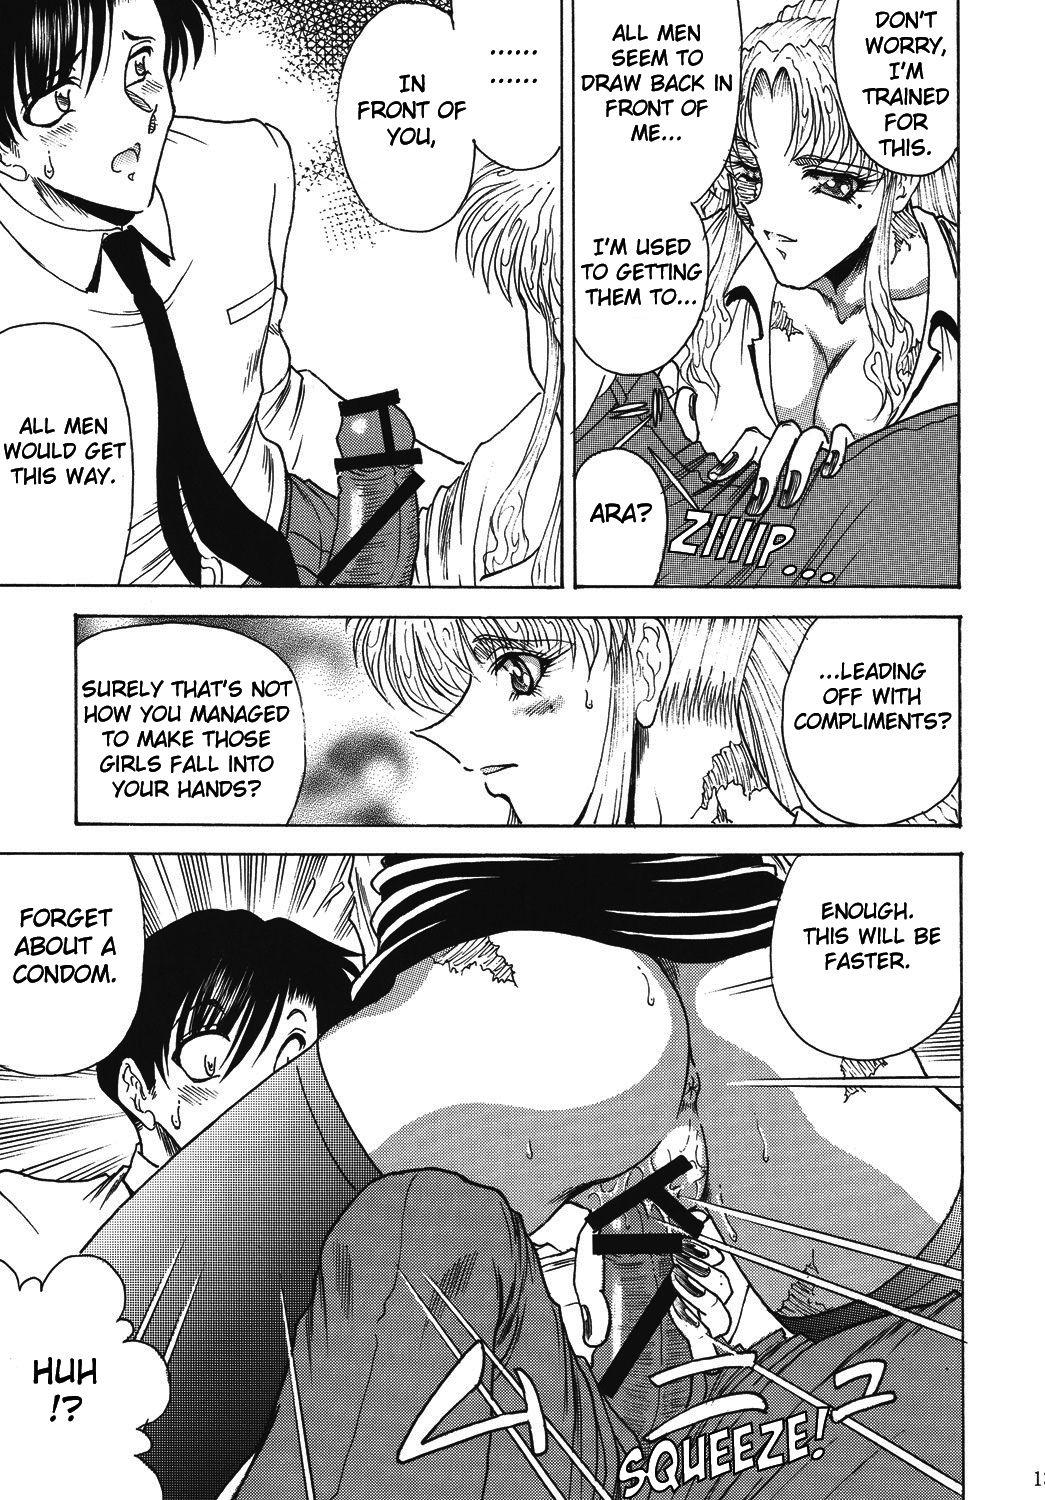 Hot Whores ZONE 39 From Rossia With Love - Black lagoon Spy Cam - Page 12